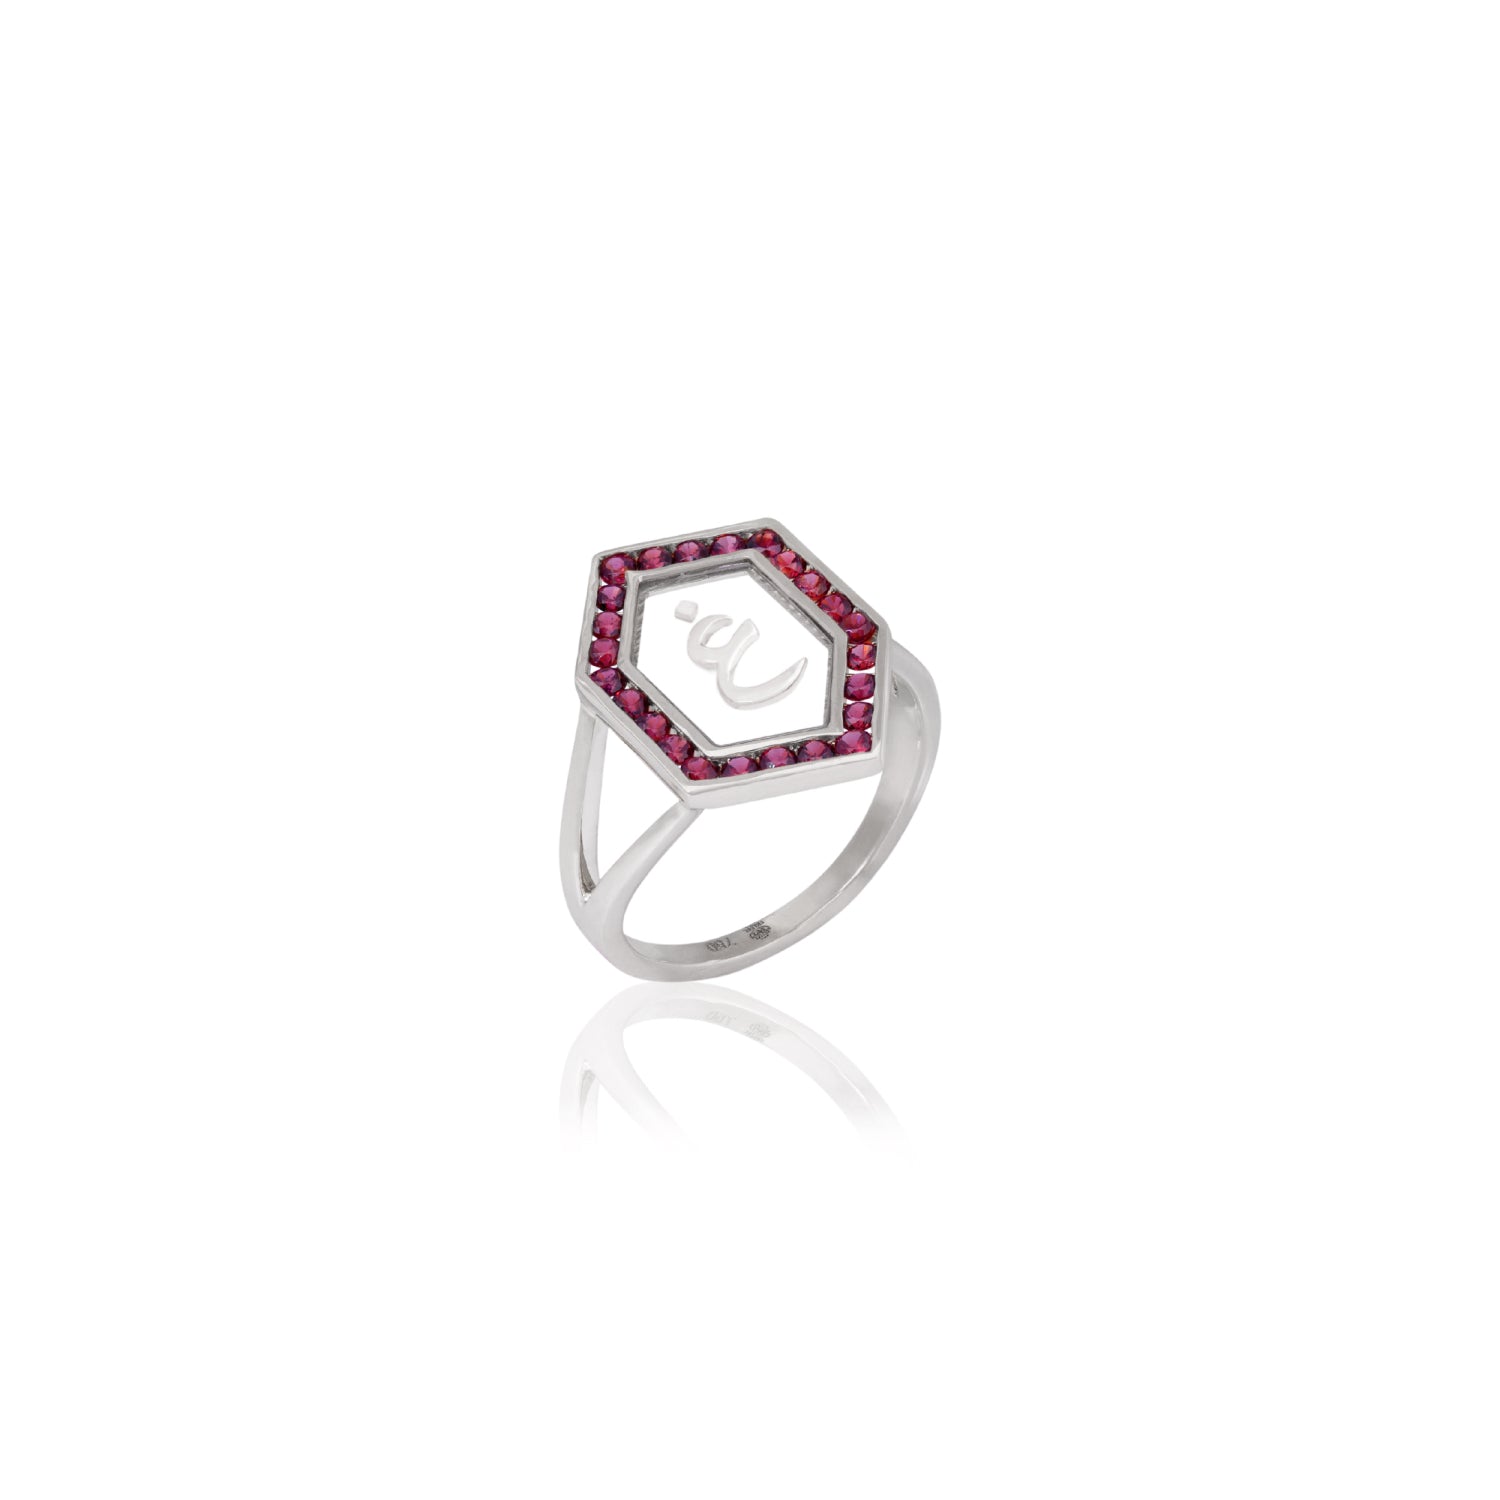 Qamoos 1.0 Letter غ Ruby Ring in White Gold